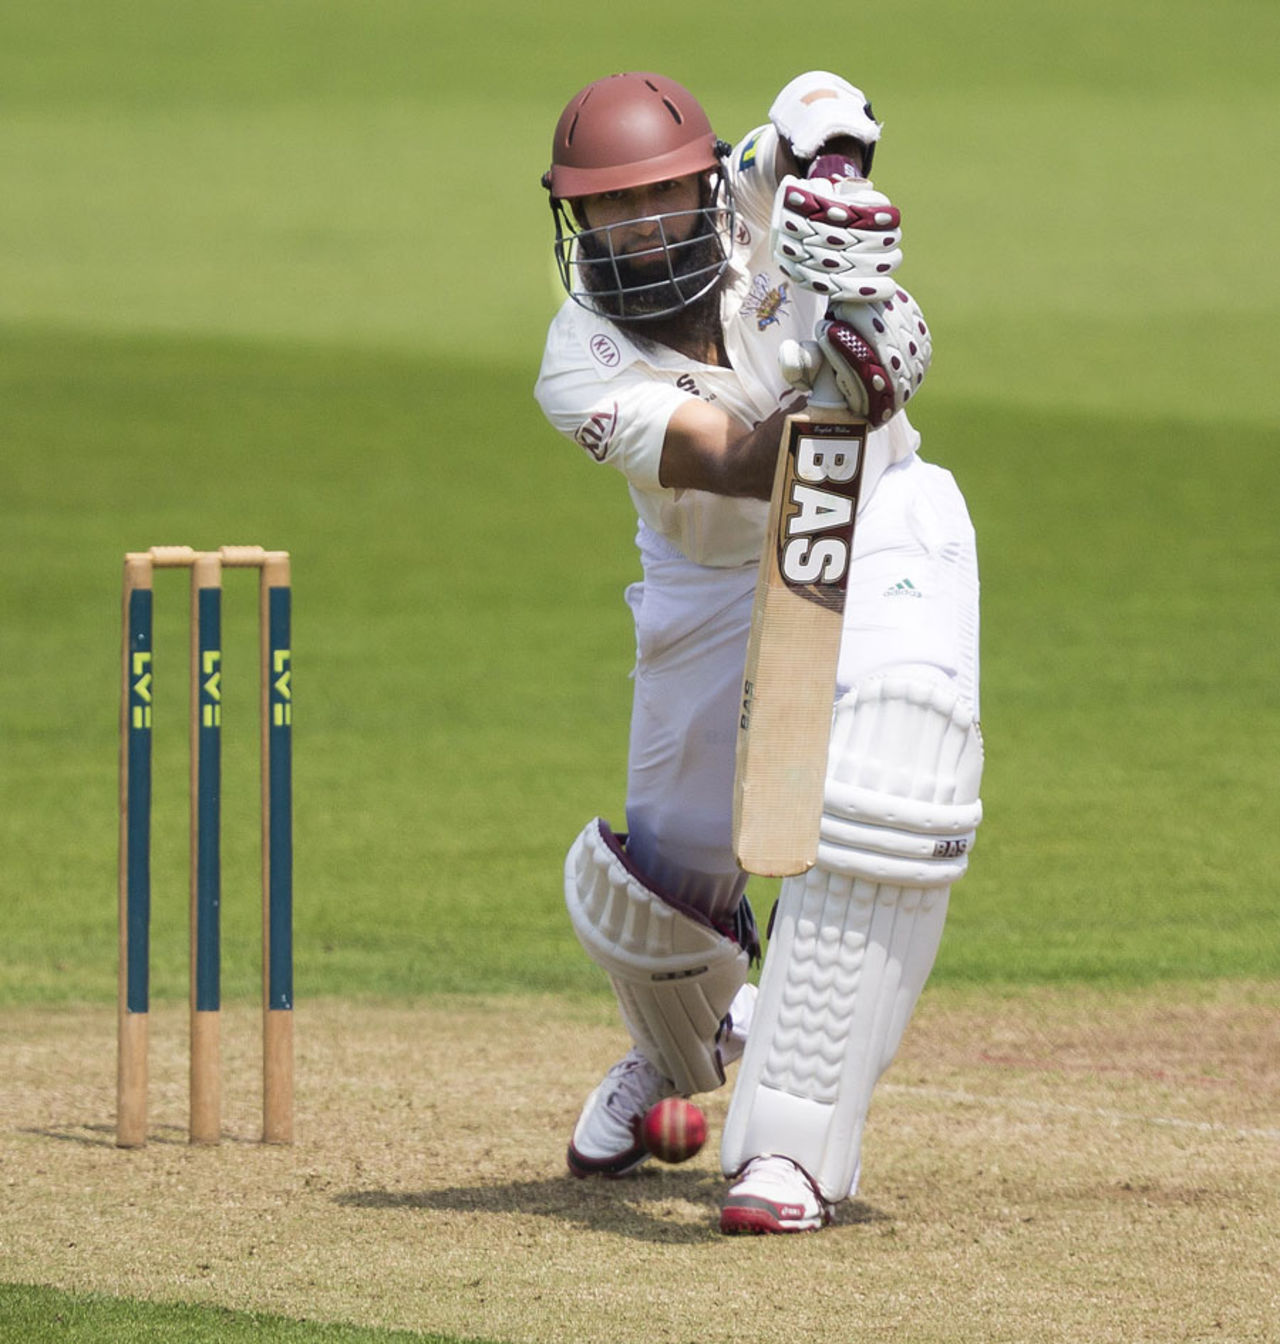 Hashim Amla drives on his way to 71, Surrey v Leicestershire, County Championship Division Two, The Oval, 1st day, June 22, 2014